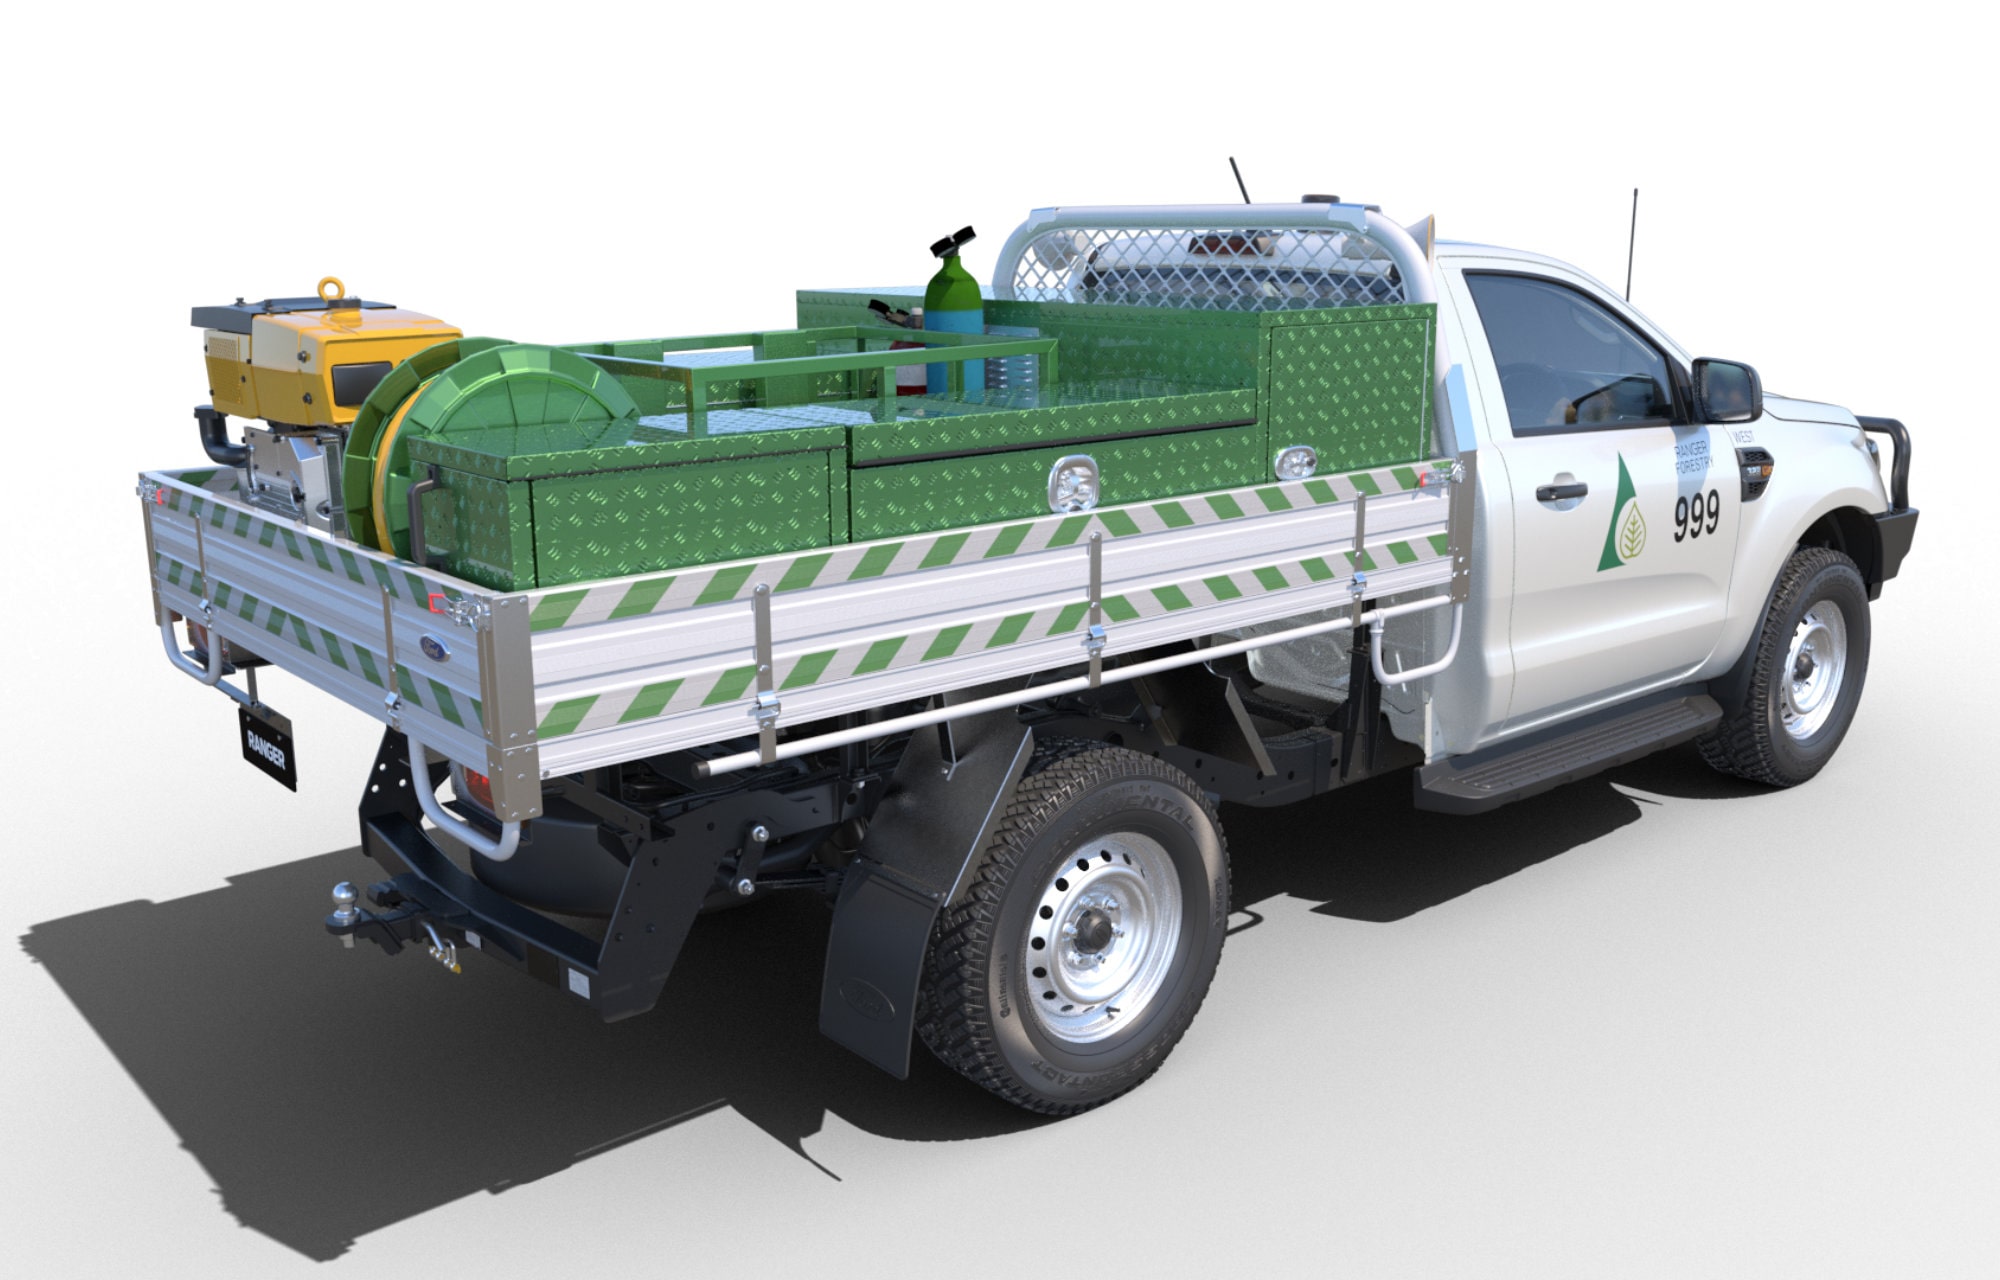 Ford Ranger Chassis-cab model